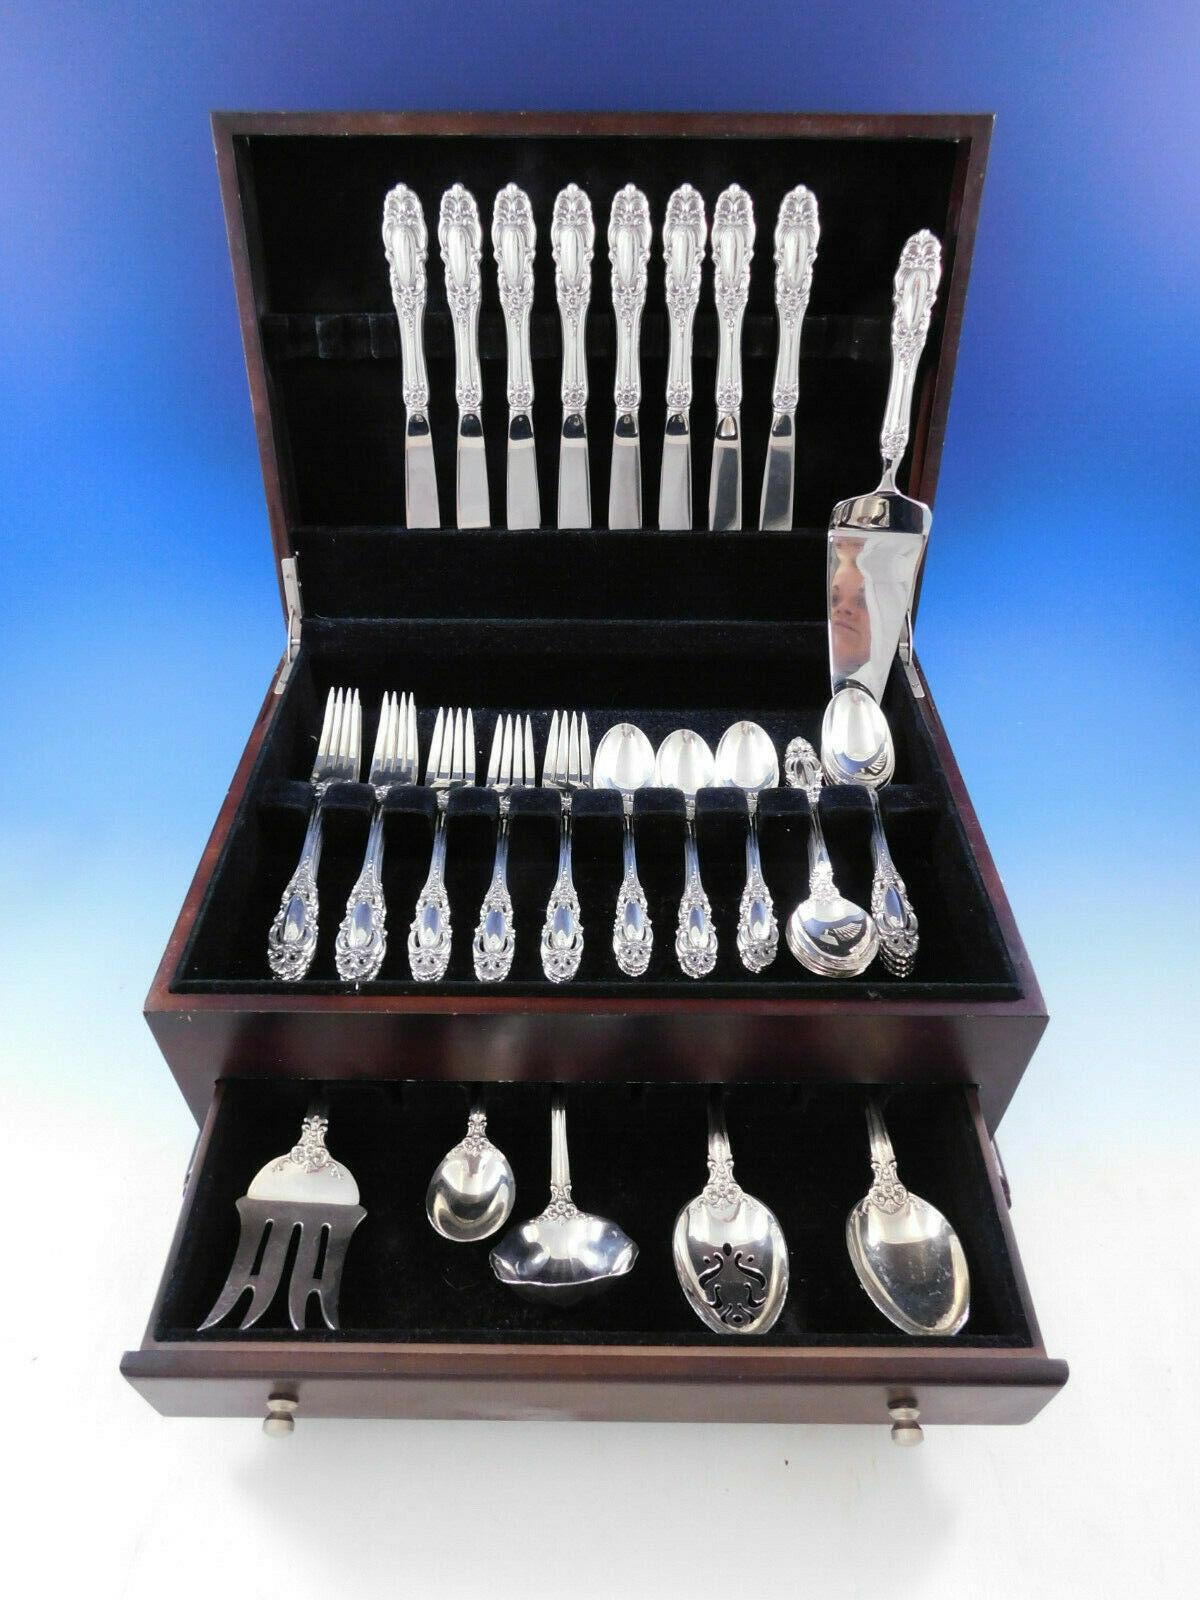 Grand Duchess by Towle sterling silver flatware set - 46 pieces. This set includes:

8 knives, 9 1/4